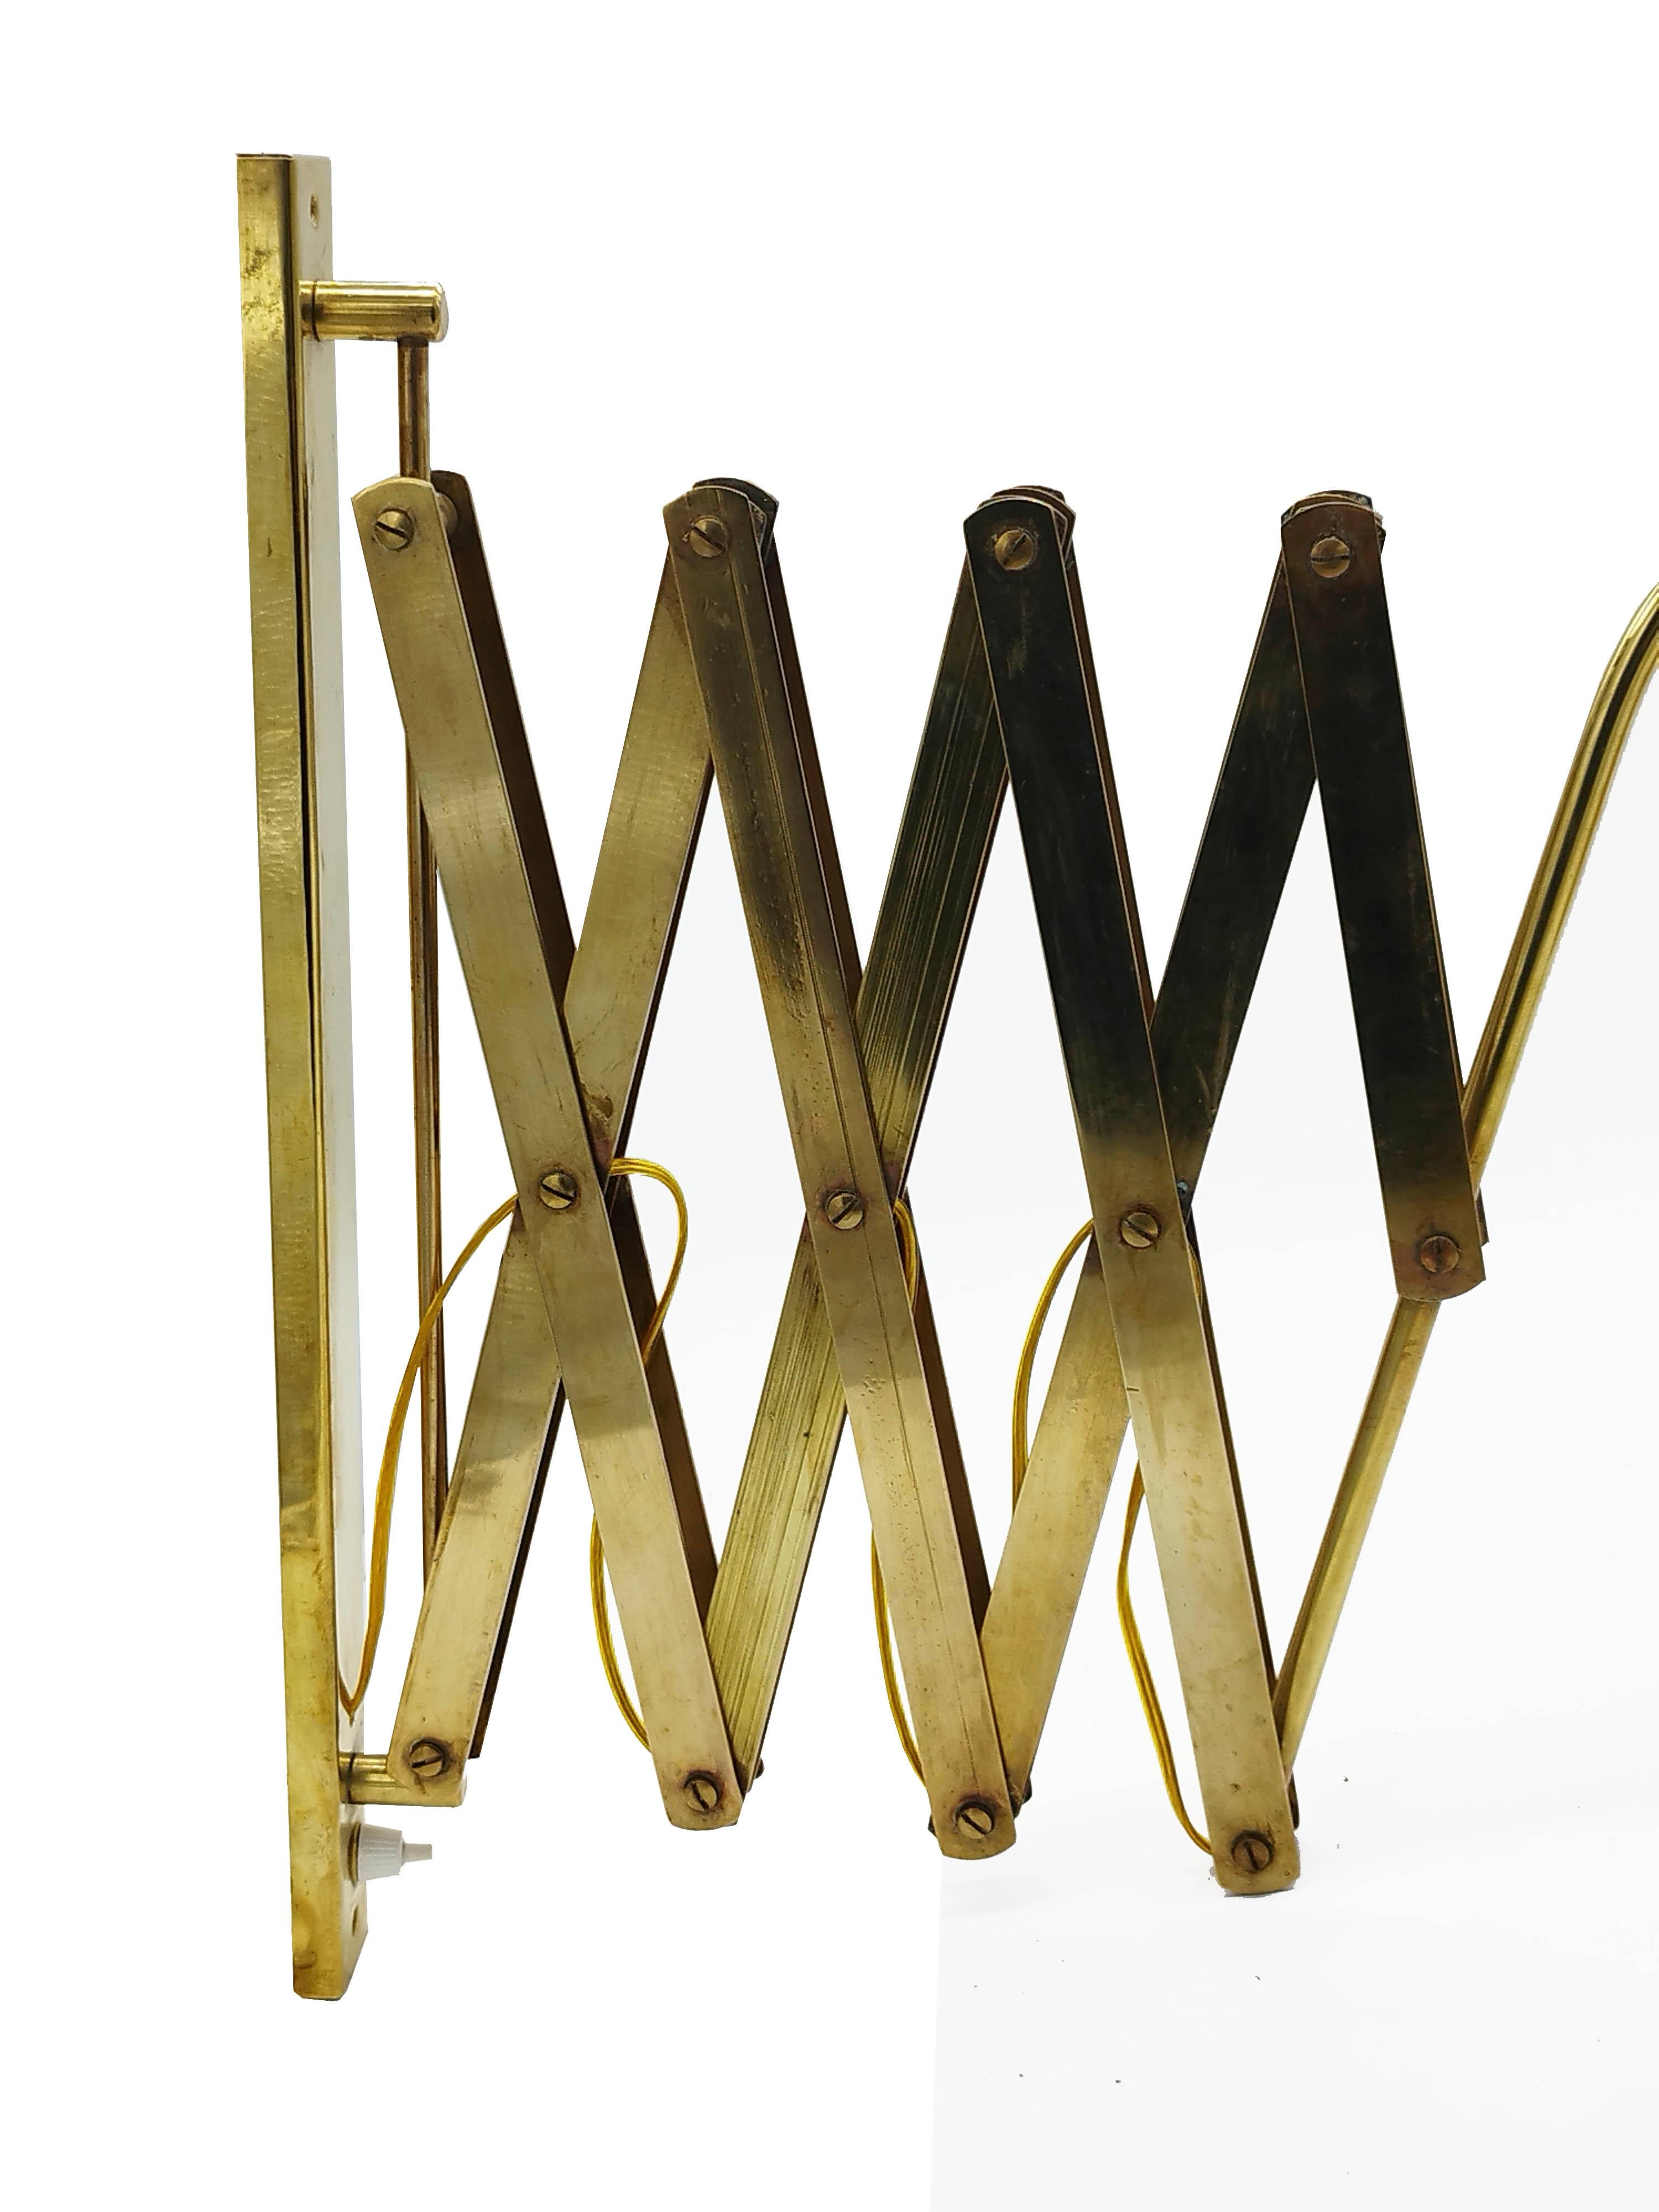 Scissor wall lamp produced in Italy in the 1950s. Entirely made of solid brass. The arm length is extendable and the shade can be swivelled up and down and the arm from left to right. Excellent original condition.